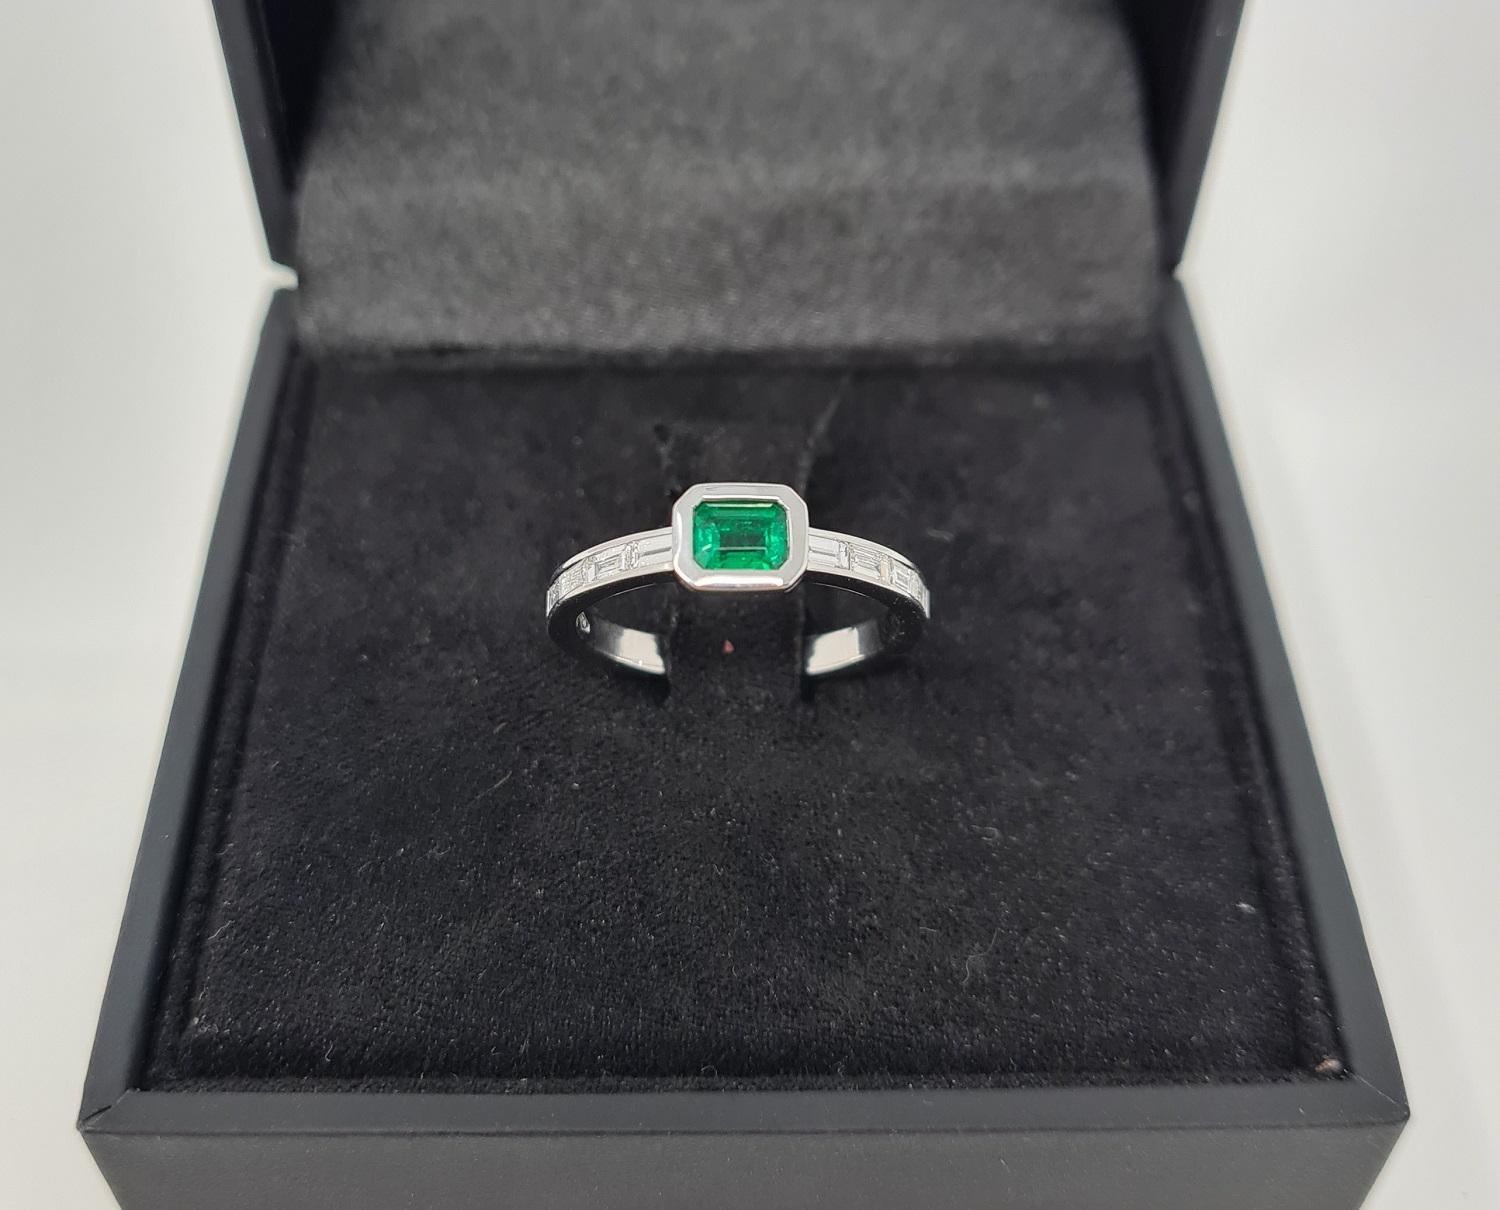 Beautiful modern solitaire ring. New ring with tags. The ring consists of white gold with 0.42 Ct natural emerald and 0.35 Ct diamonds baguette cut.
Total weight: 3.37 grams
Metal: white gold 18Kt
New contemporary jewelry. 
US Ring size 7 please see